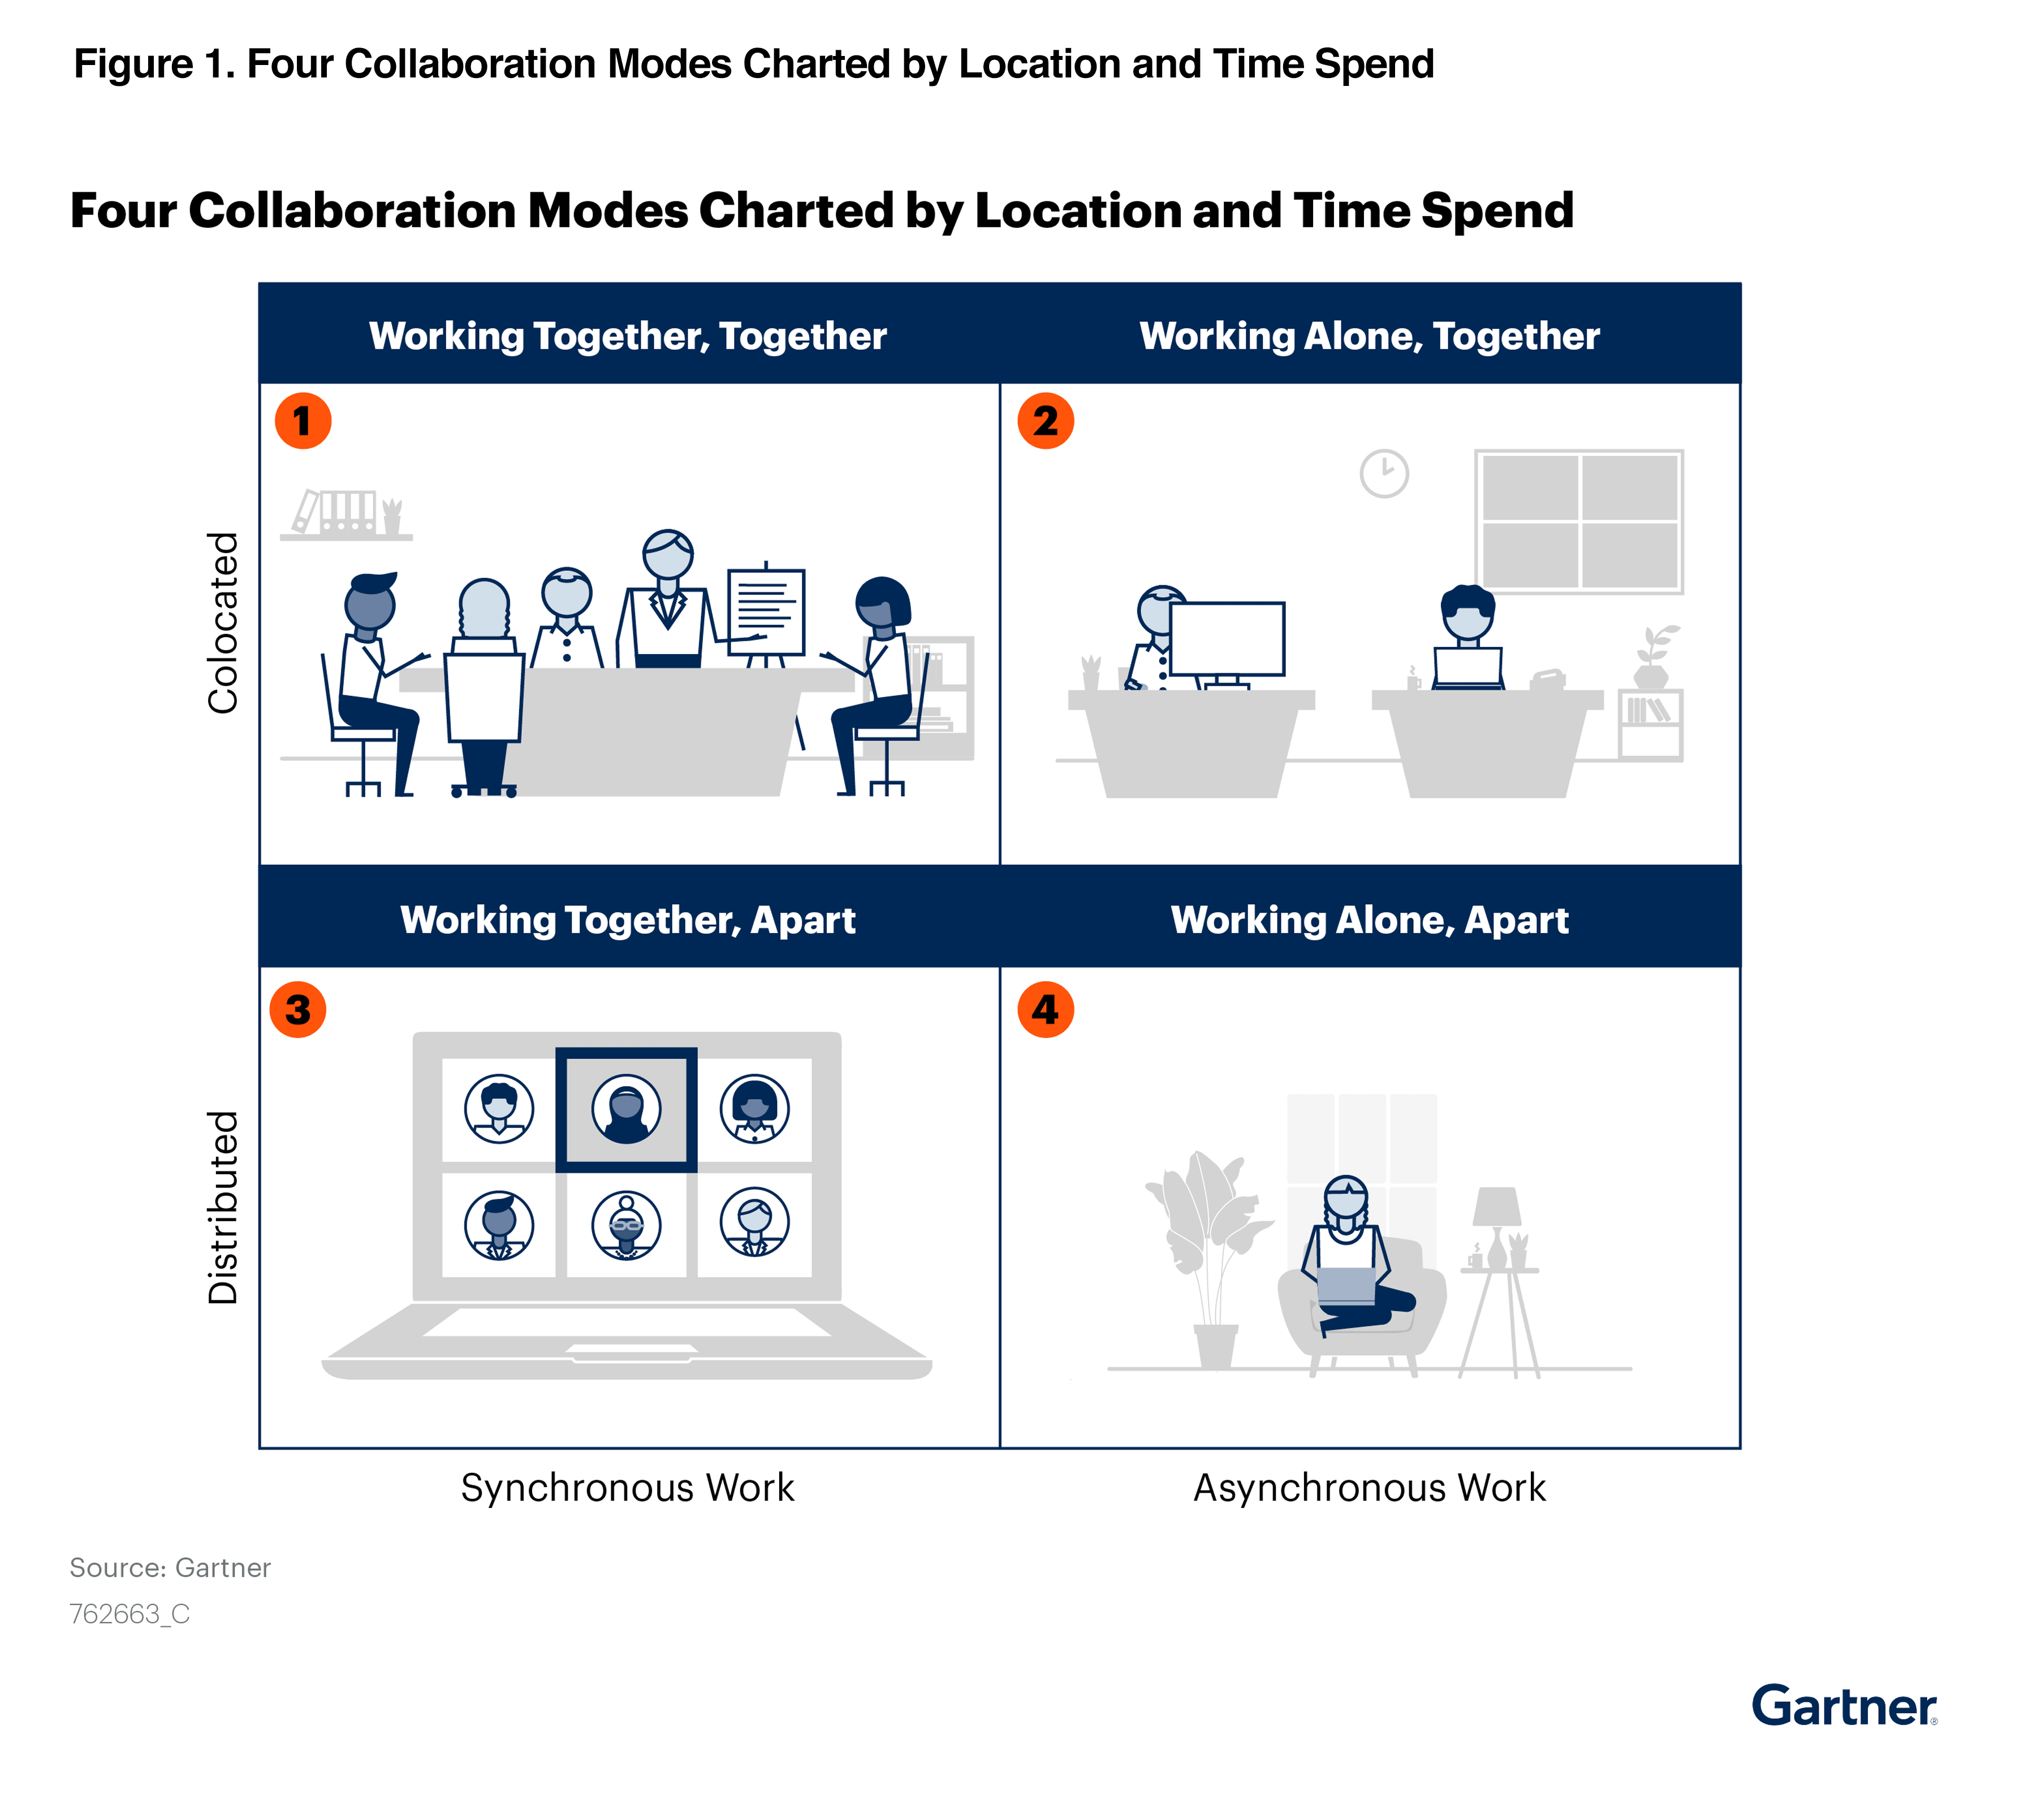 Four collaboration modes charted by location and time spend